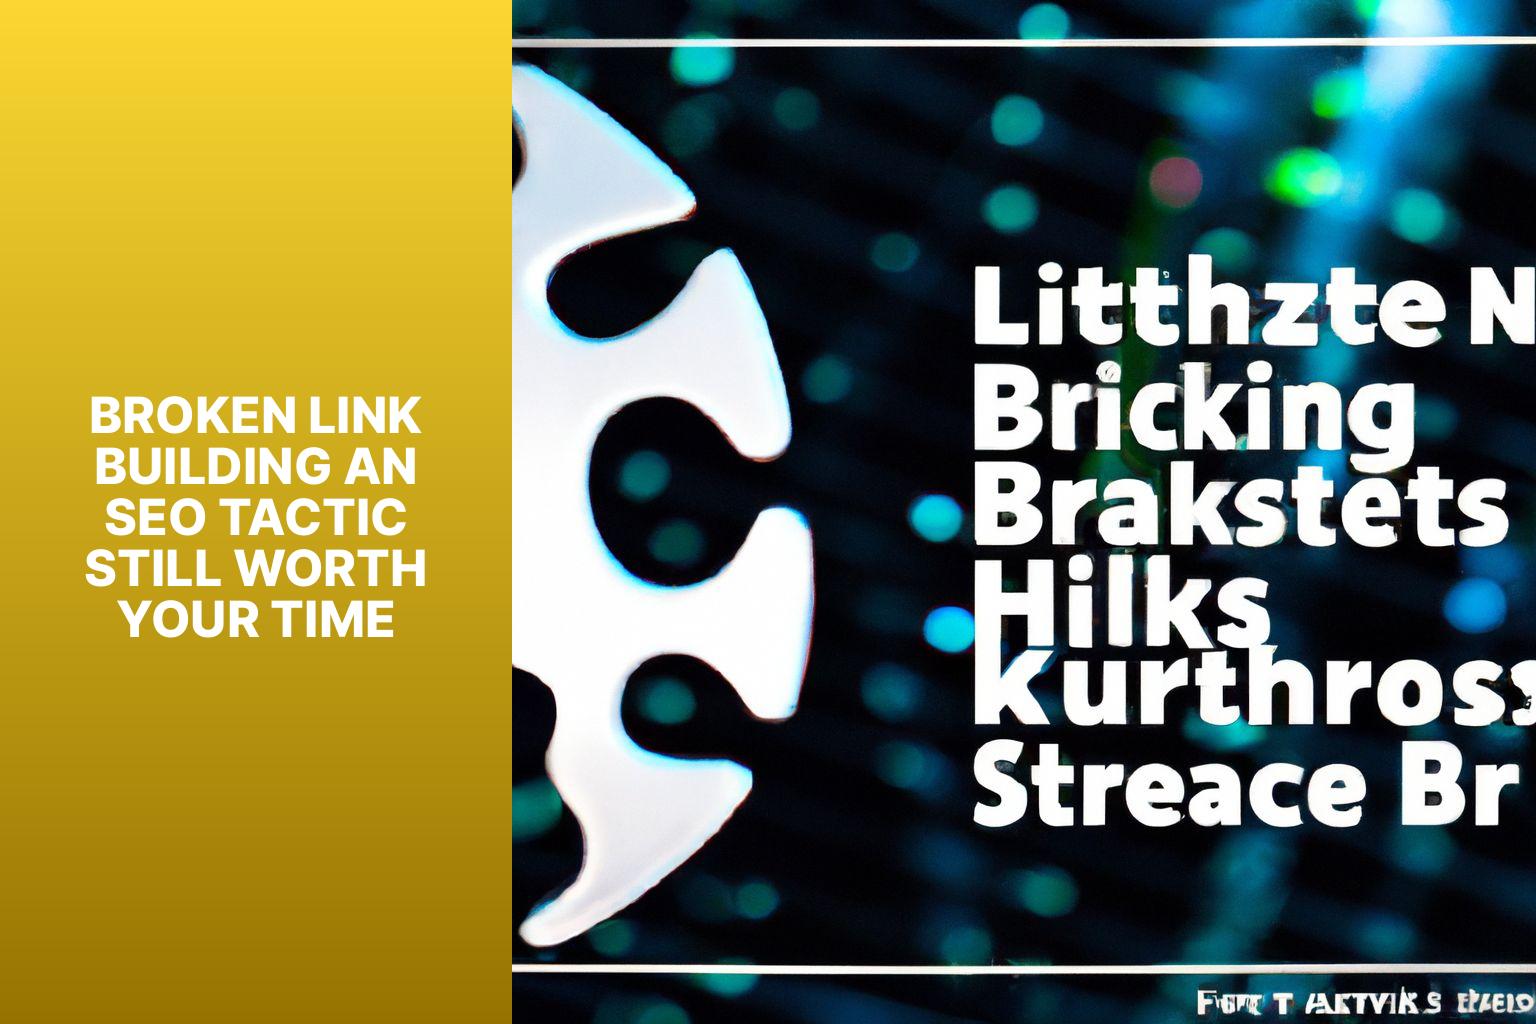 Broken Link Building An SEO Tactic Still Worth Your Time